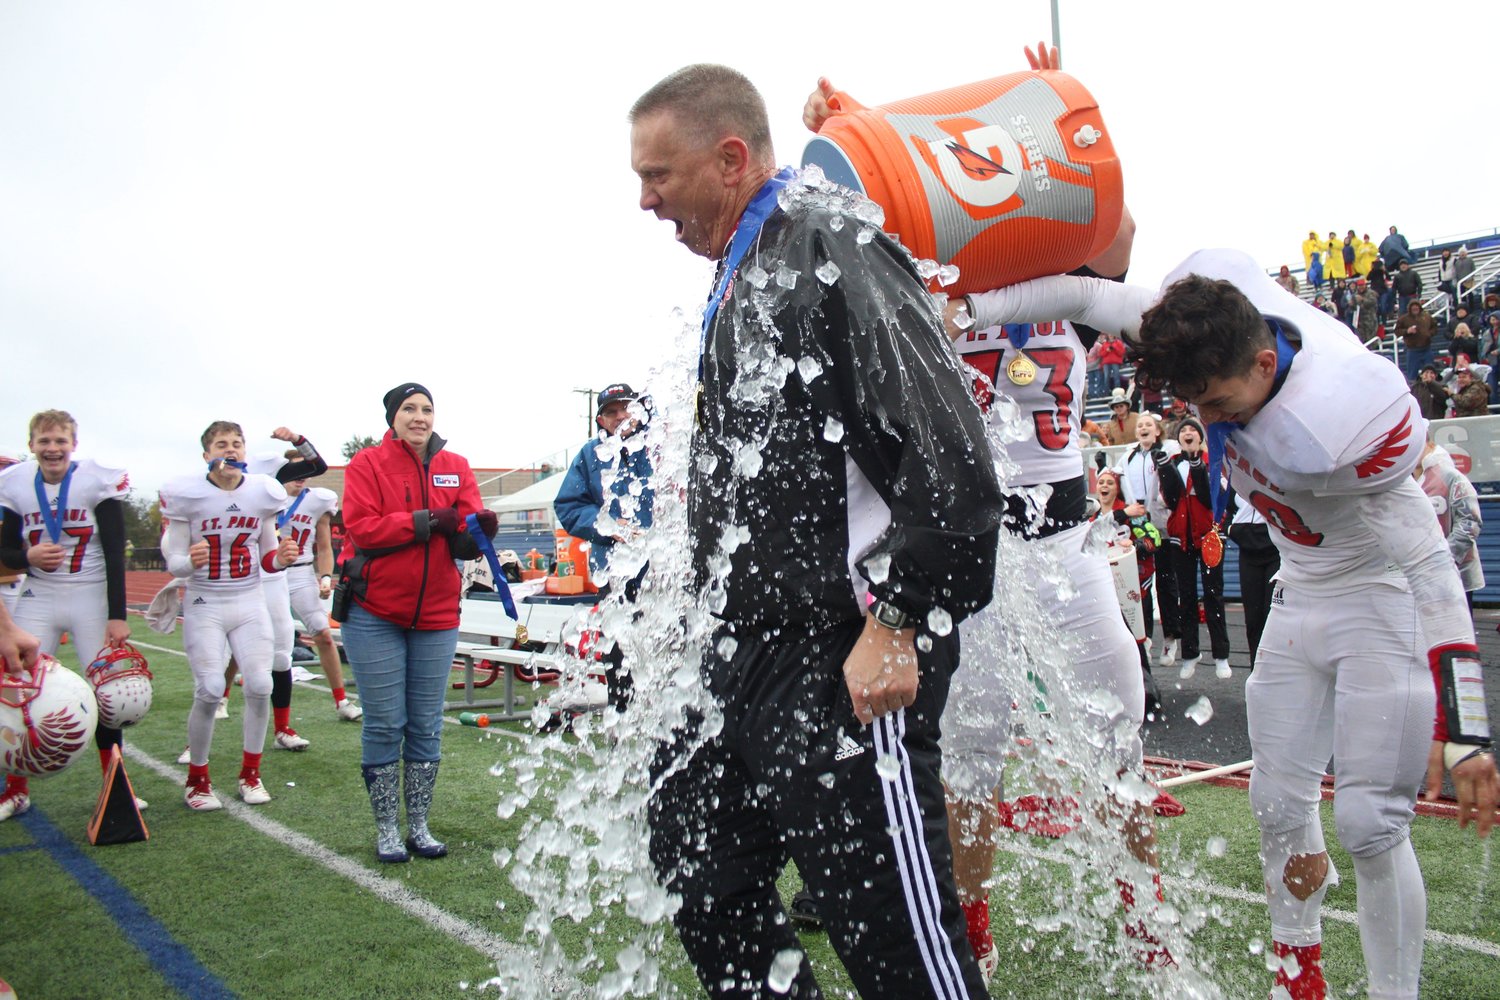 Shiner St. Paul Head Coach Jake Wachsmuth receives the celebratory cooler bath after his fifth state title win.